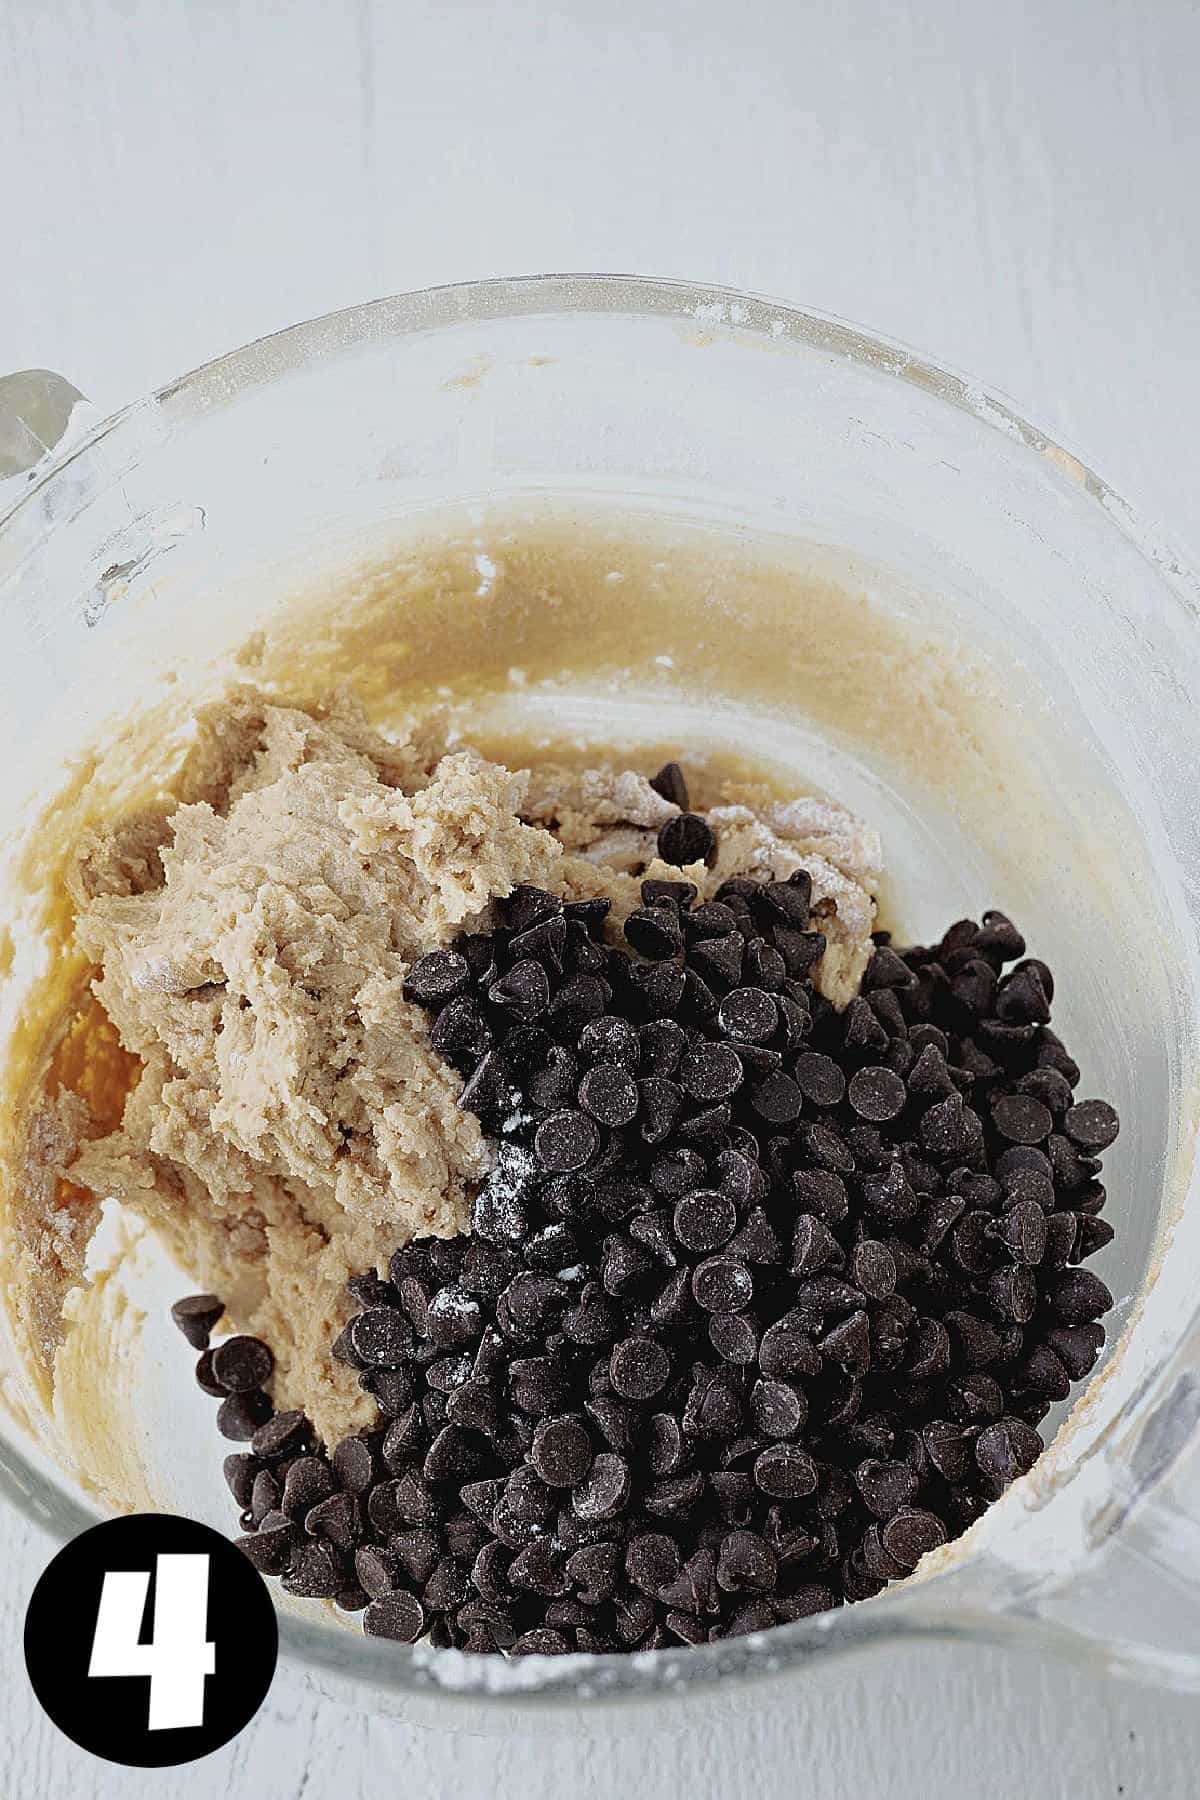 Chocolate chips on top of raw cookie dough.